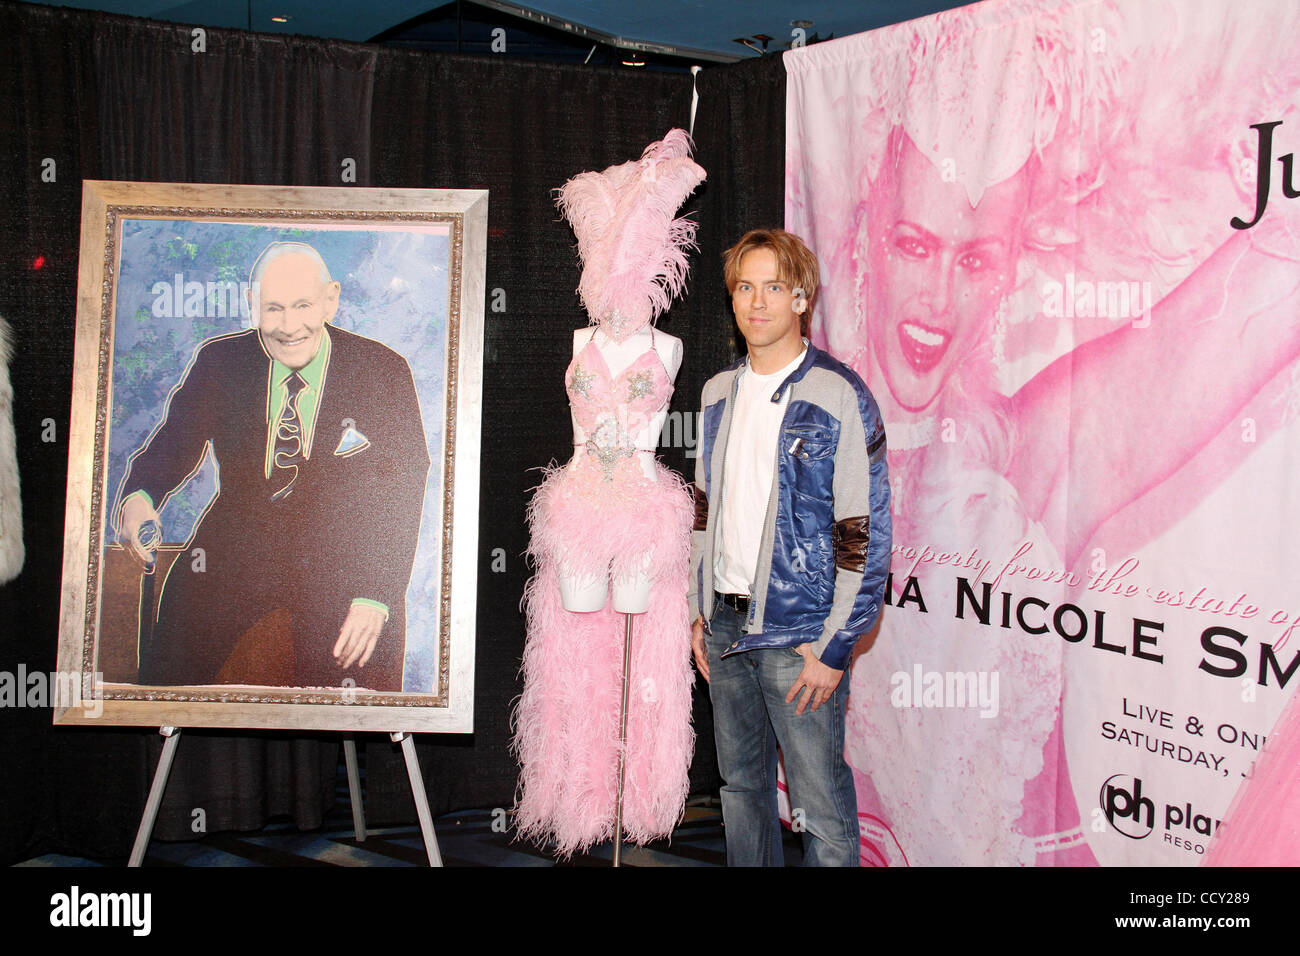 Photographer (R) LARRY BIRKHEAD stands next to a (C) costume worn by  his former partner ANNA NICOLE SMITH during a 2004 Halloween Party at the Playboy Mansion and an (L) original screen print portrait of Anna Nicole's former husband J. Howard Marshall. Items sold will  benefit his daughter Danniely Stock Photo